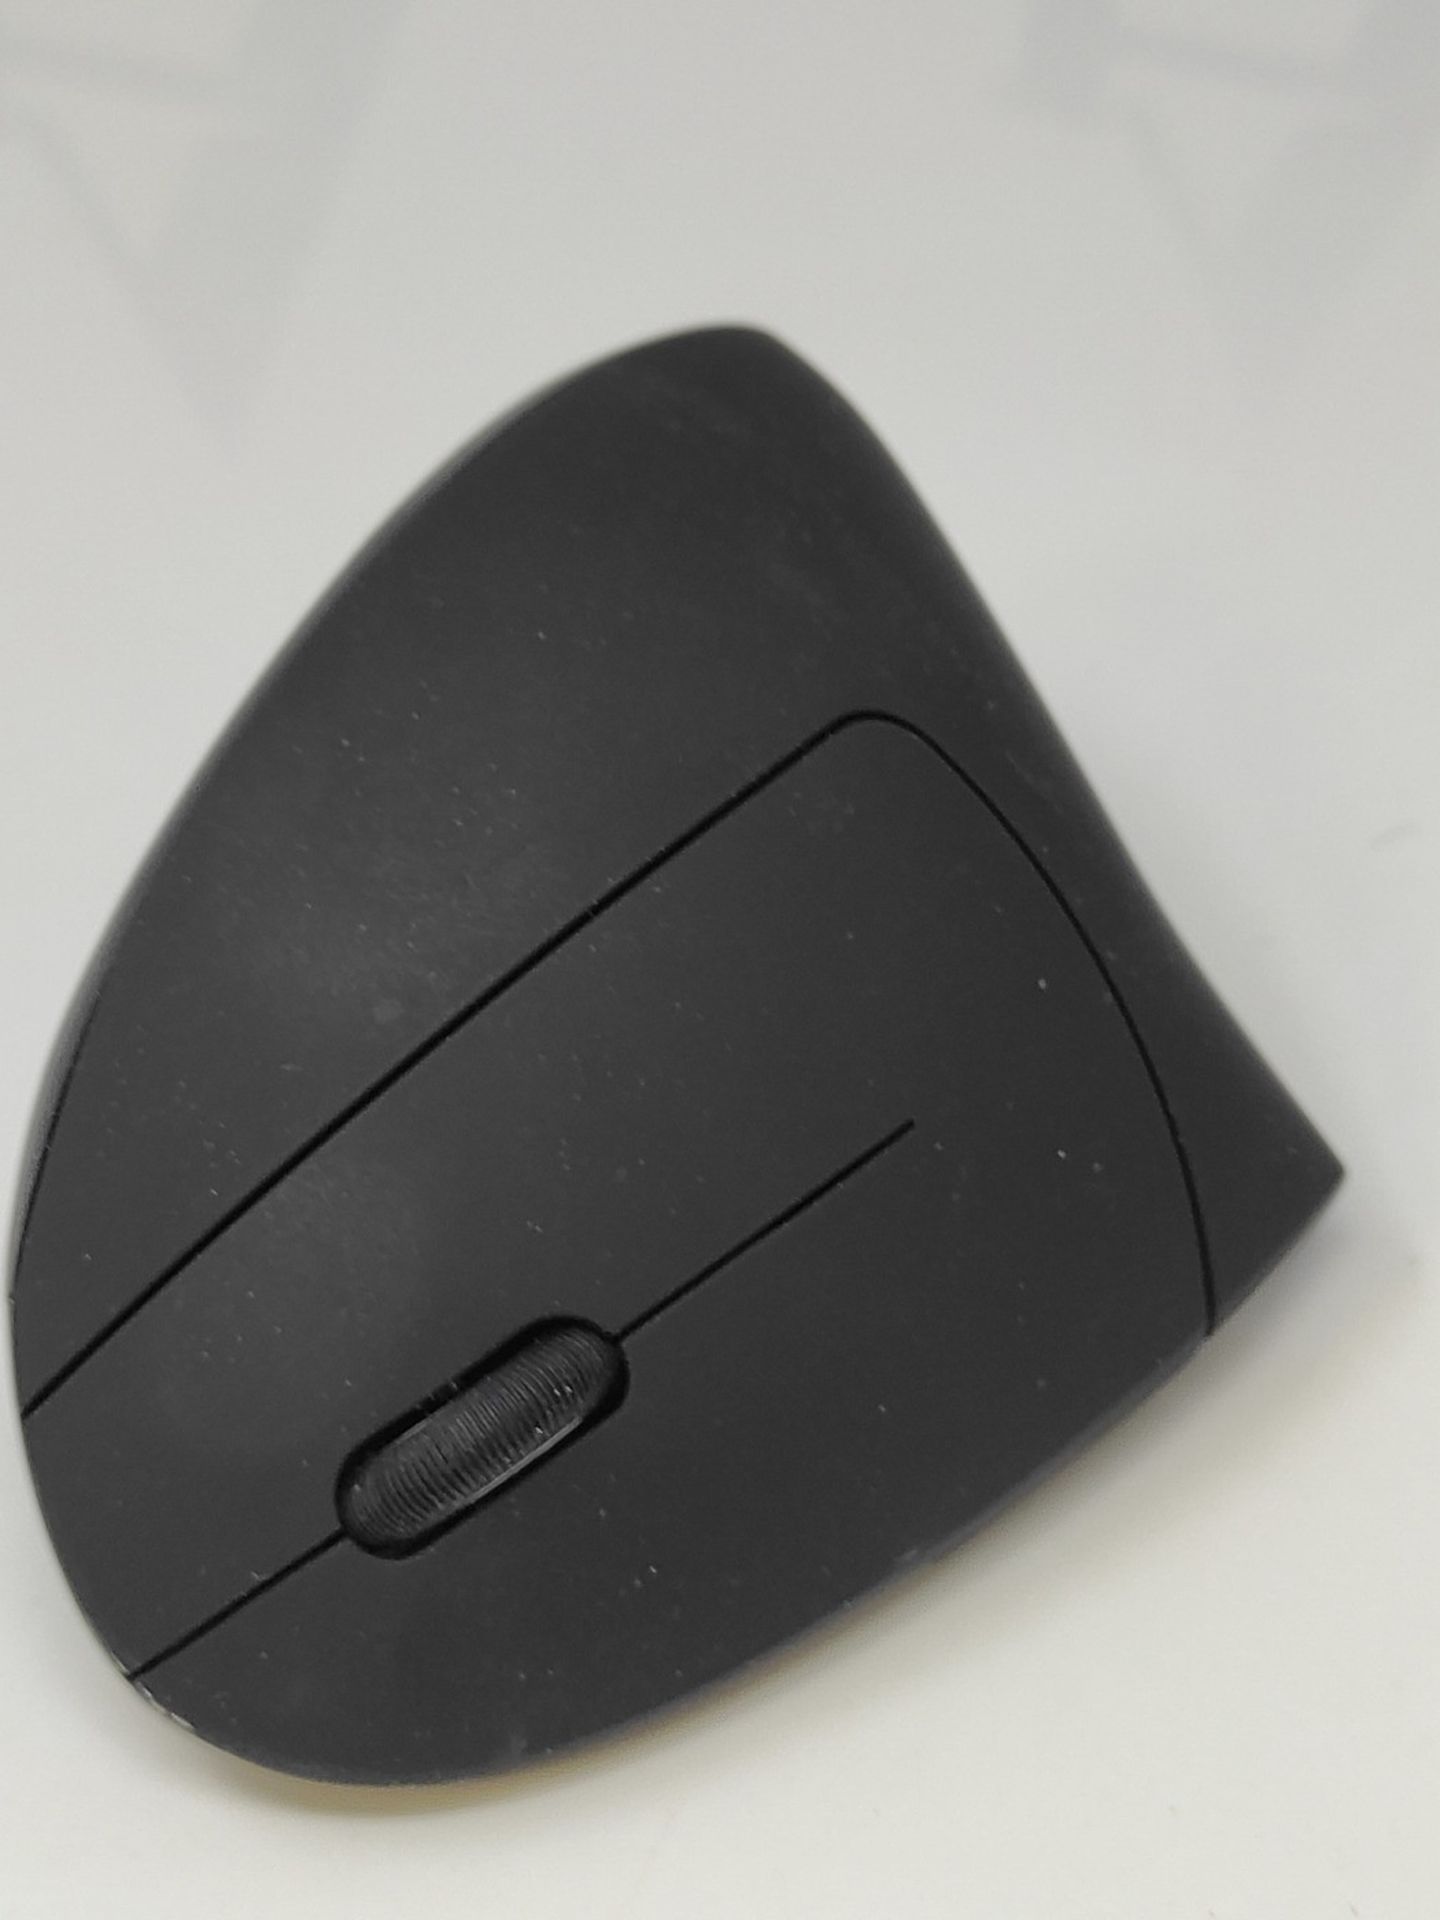 Trust Verto Wireless Vertical Mouse, Ergonomic Vertical Mouse, 800-1600 DPI, 6 Buttons - Image 6 of 6